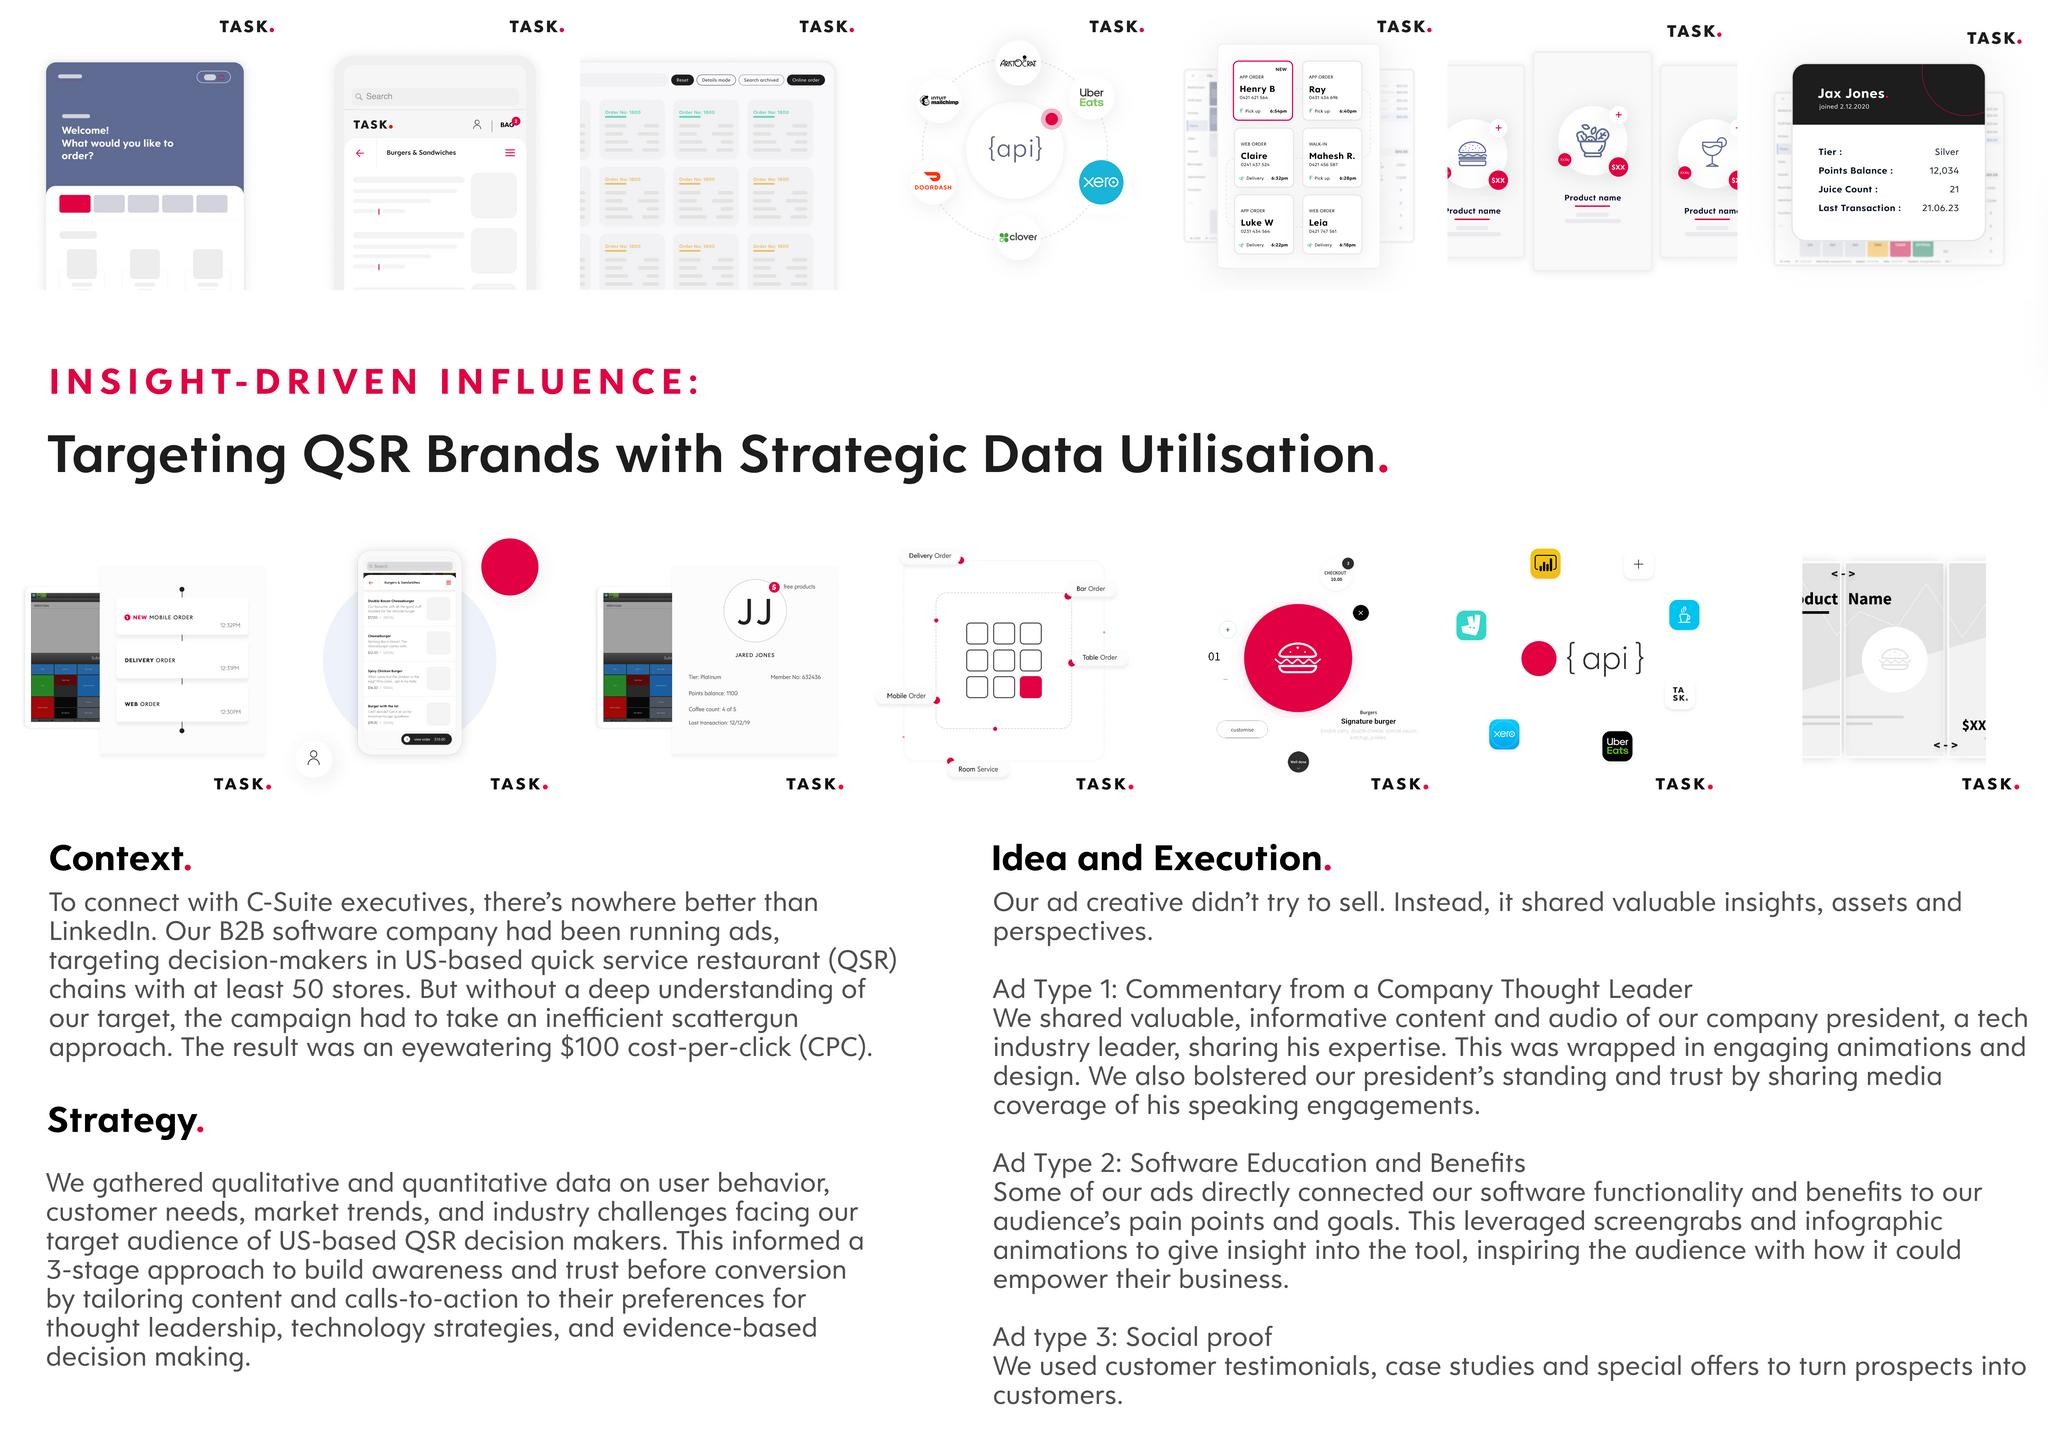 INSIGHT-DRIVEN INFLUENCE: TARGETING QSR BRANDS WITH STRATEGIC DATA UTILISATION